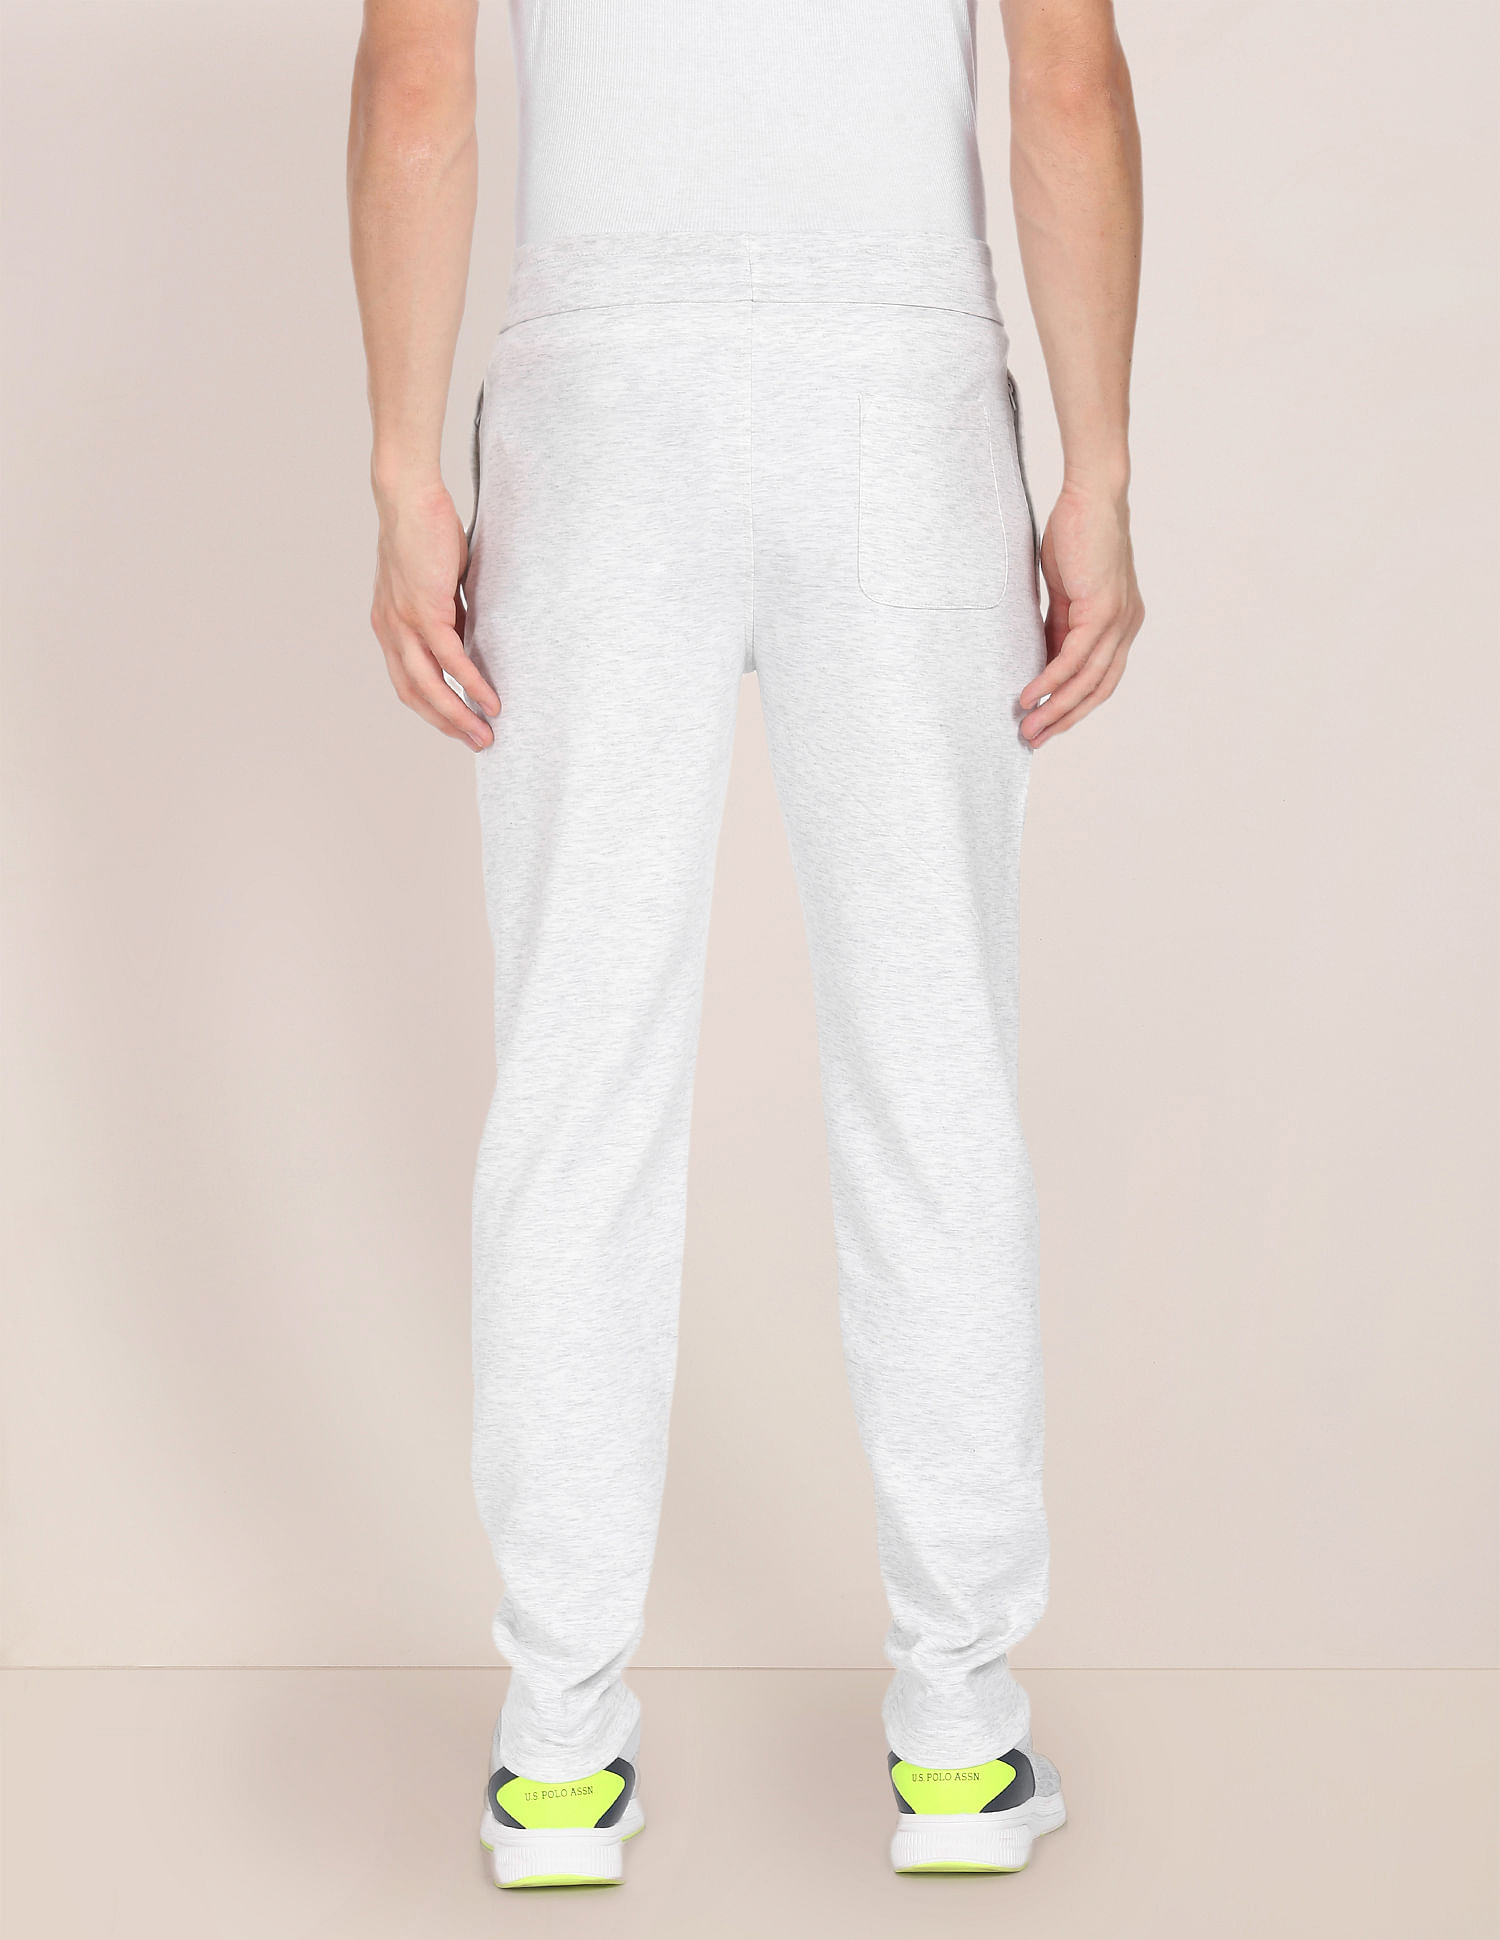 Buy Grey Track Pants for Men by U.S. Polo Assn. Online